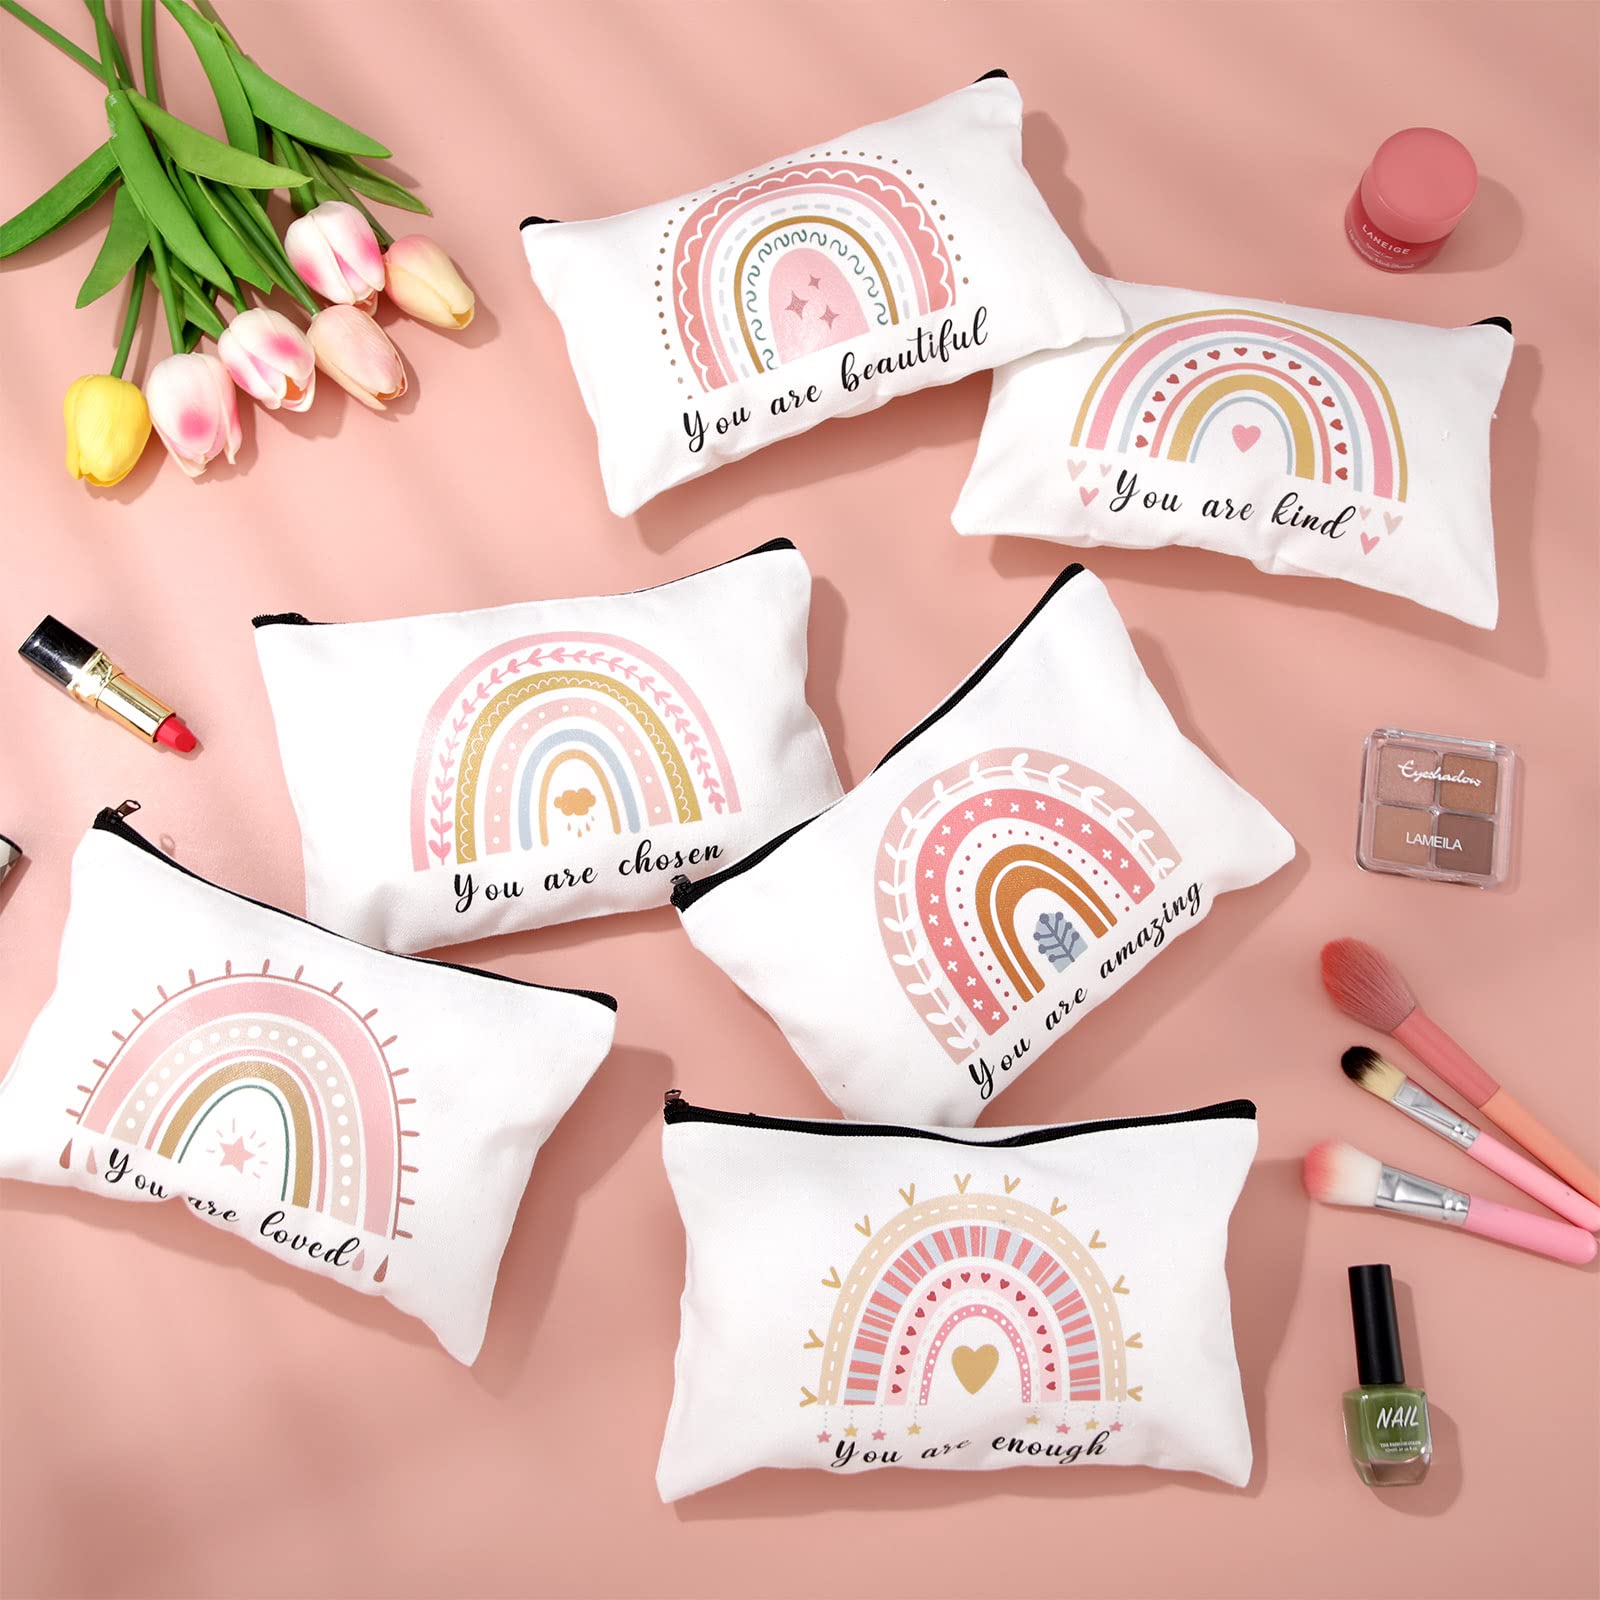 12 Pieces Rainbow Cosmetic Bag Inspirational Quotes Canvas Makeup Bags Bulk Inspirational Gifts for Girl and Women, Travel Pouch Toiletry Bag with Zipper Friendship Teacher Graduation Christmas Gift